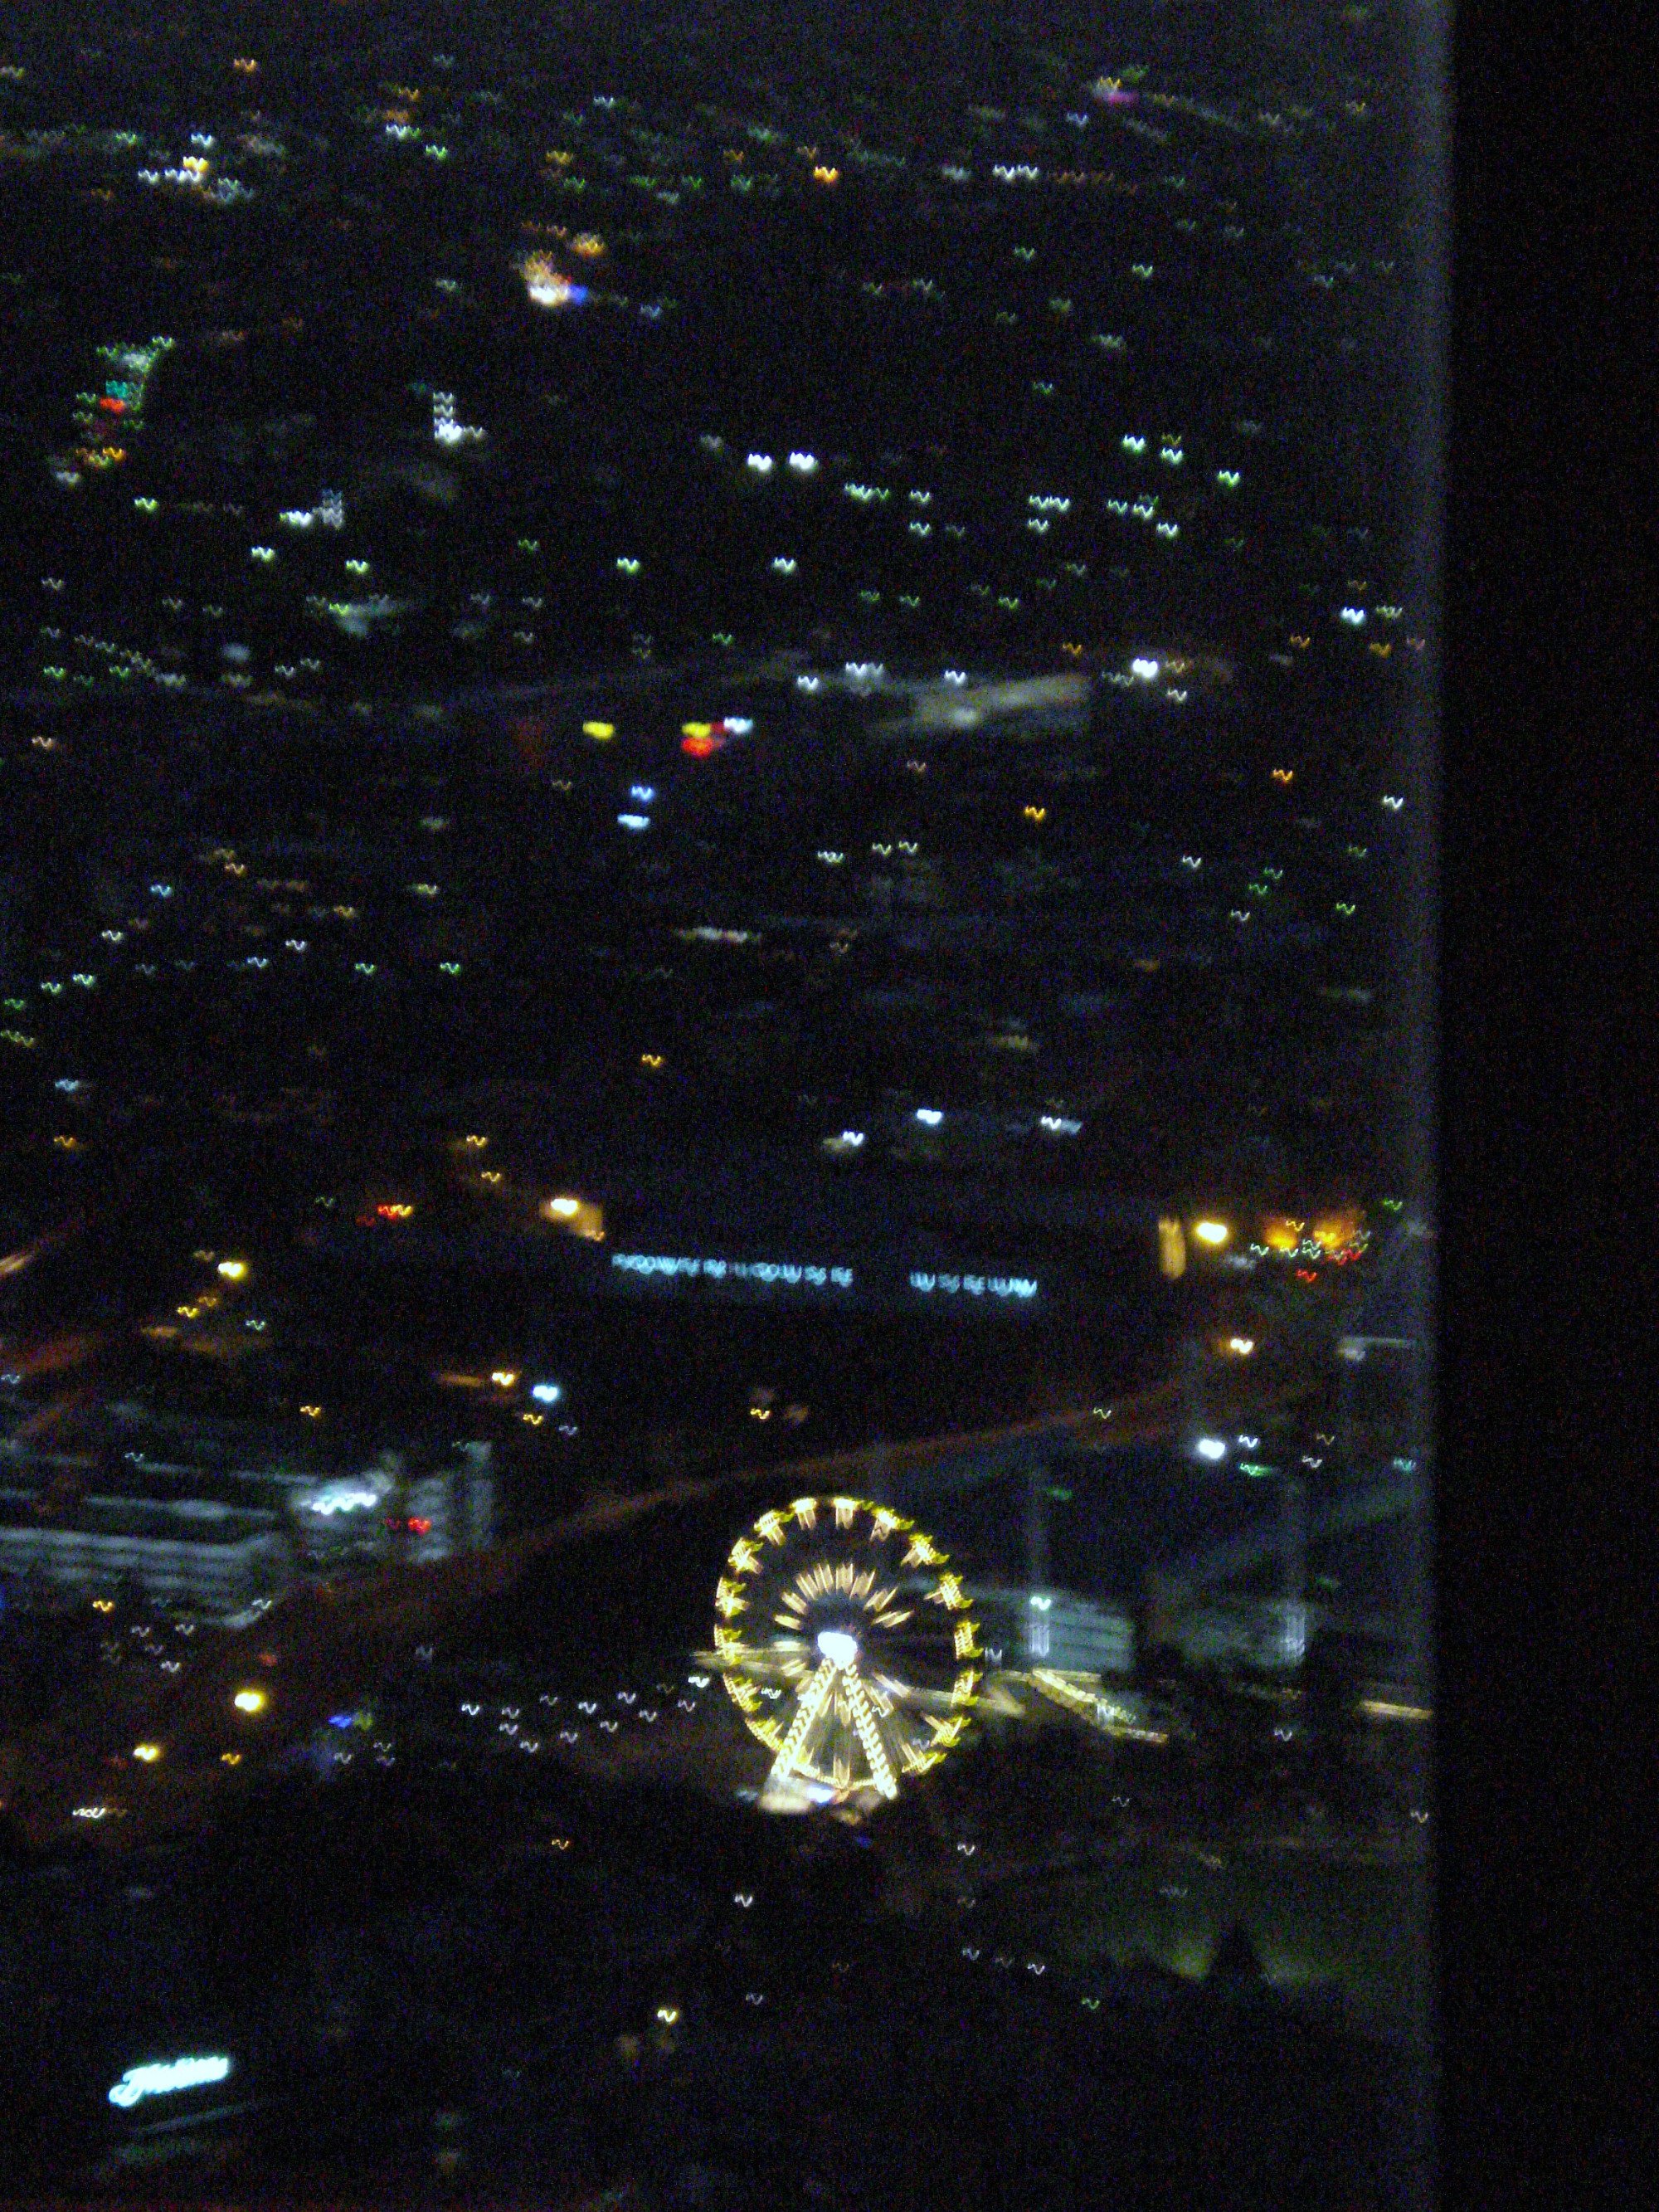 Luna Park at night viewed from tower